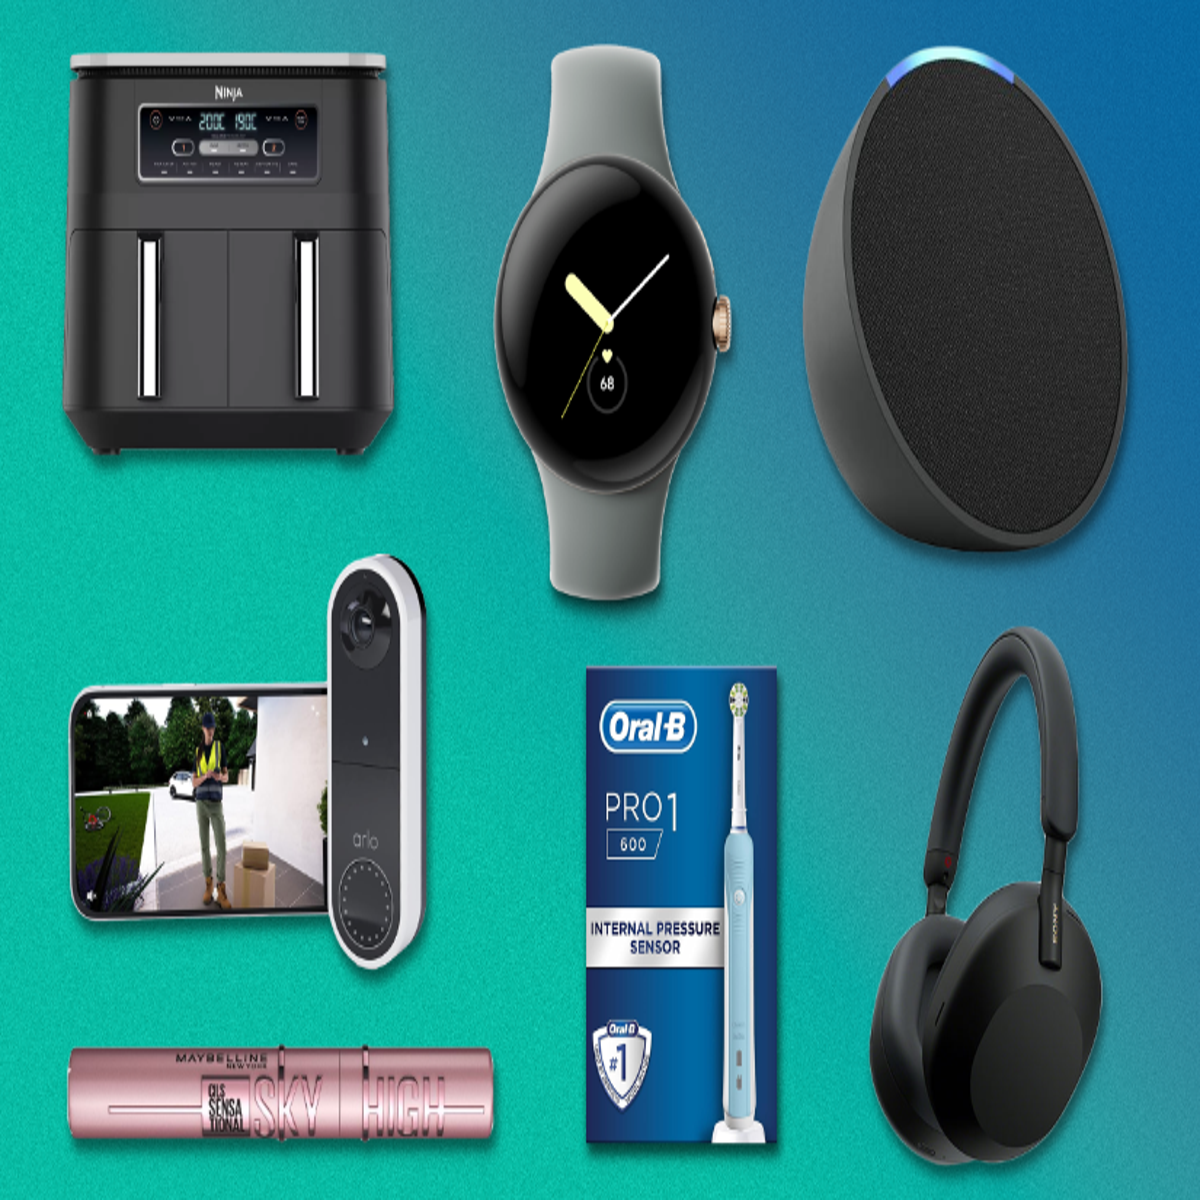 Check Out These Great Best Buy Counter Deals to October Prime Day